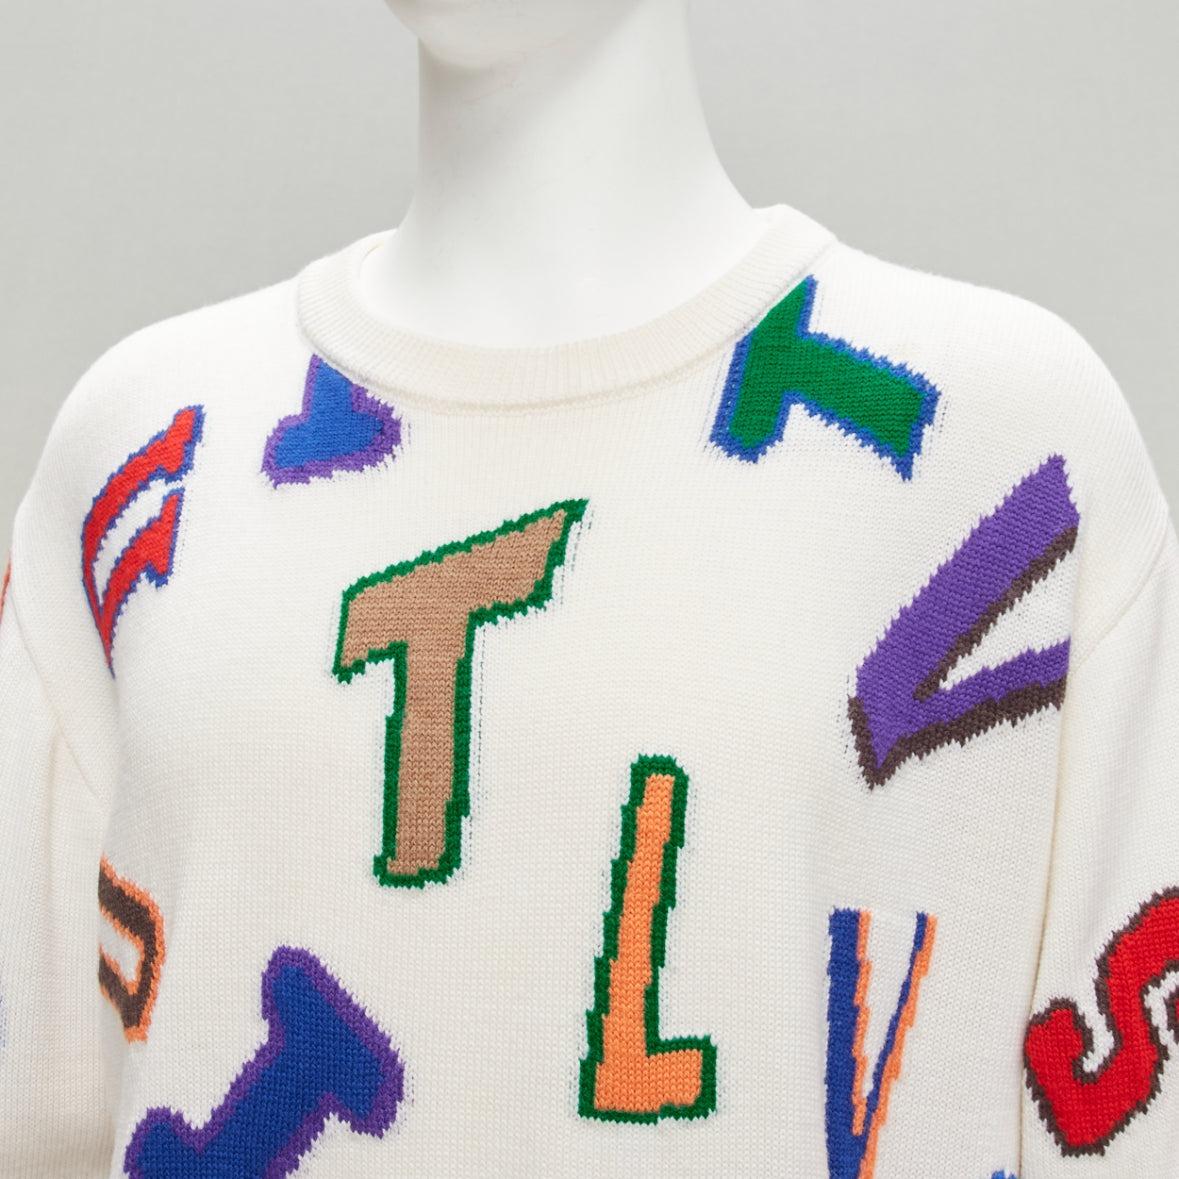 LOUIS VUITTON Virgil Abloh NBA 2021 white logo letters wool sweater XL
Reference: TGAS/D00867
Brand: Louis Vuitton
Designer: Virgil Abloh
Collection: NBA AW2021
Material: Wool
Color: White, Multicolour
Pattern: Graffiti
Closure: Pullover
Extra